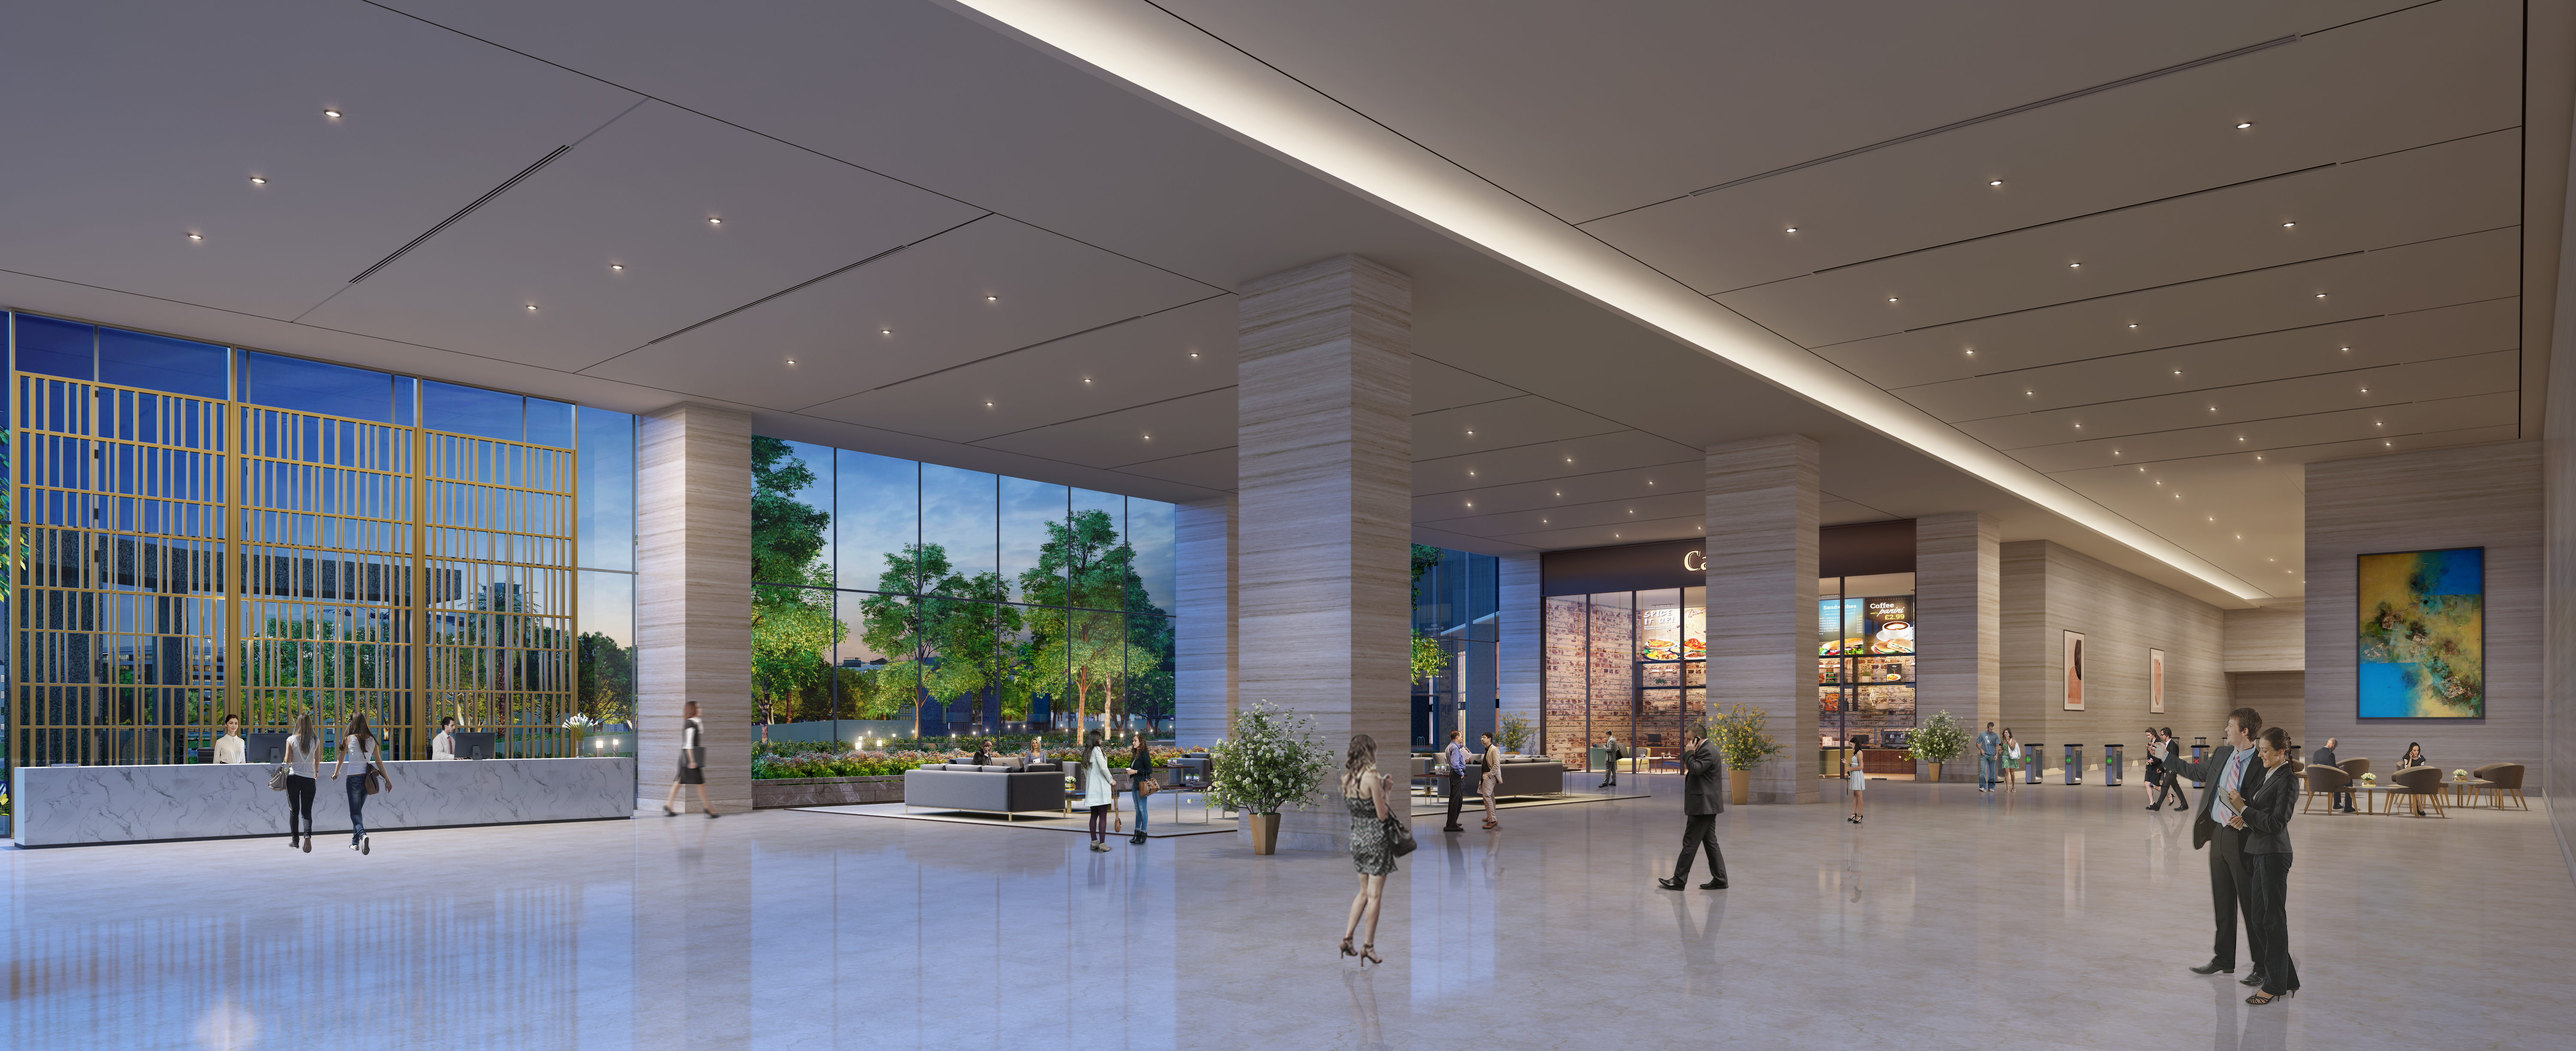 Bluegrass Business Park lobby rendering with view of reception desk